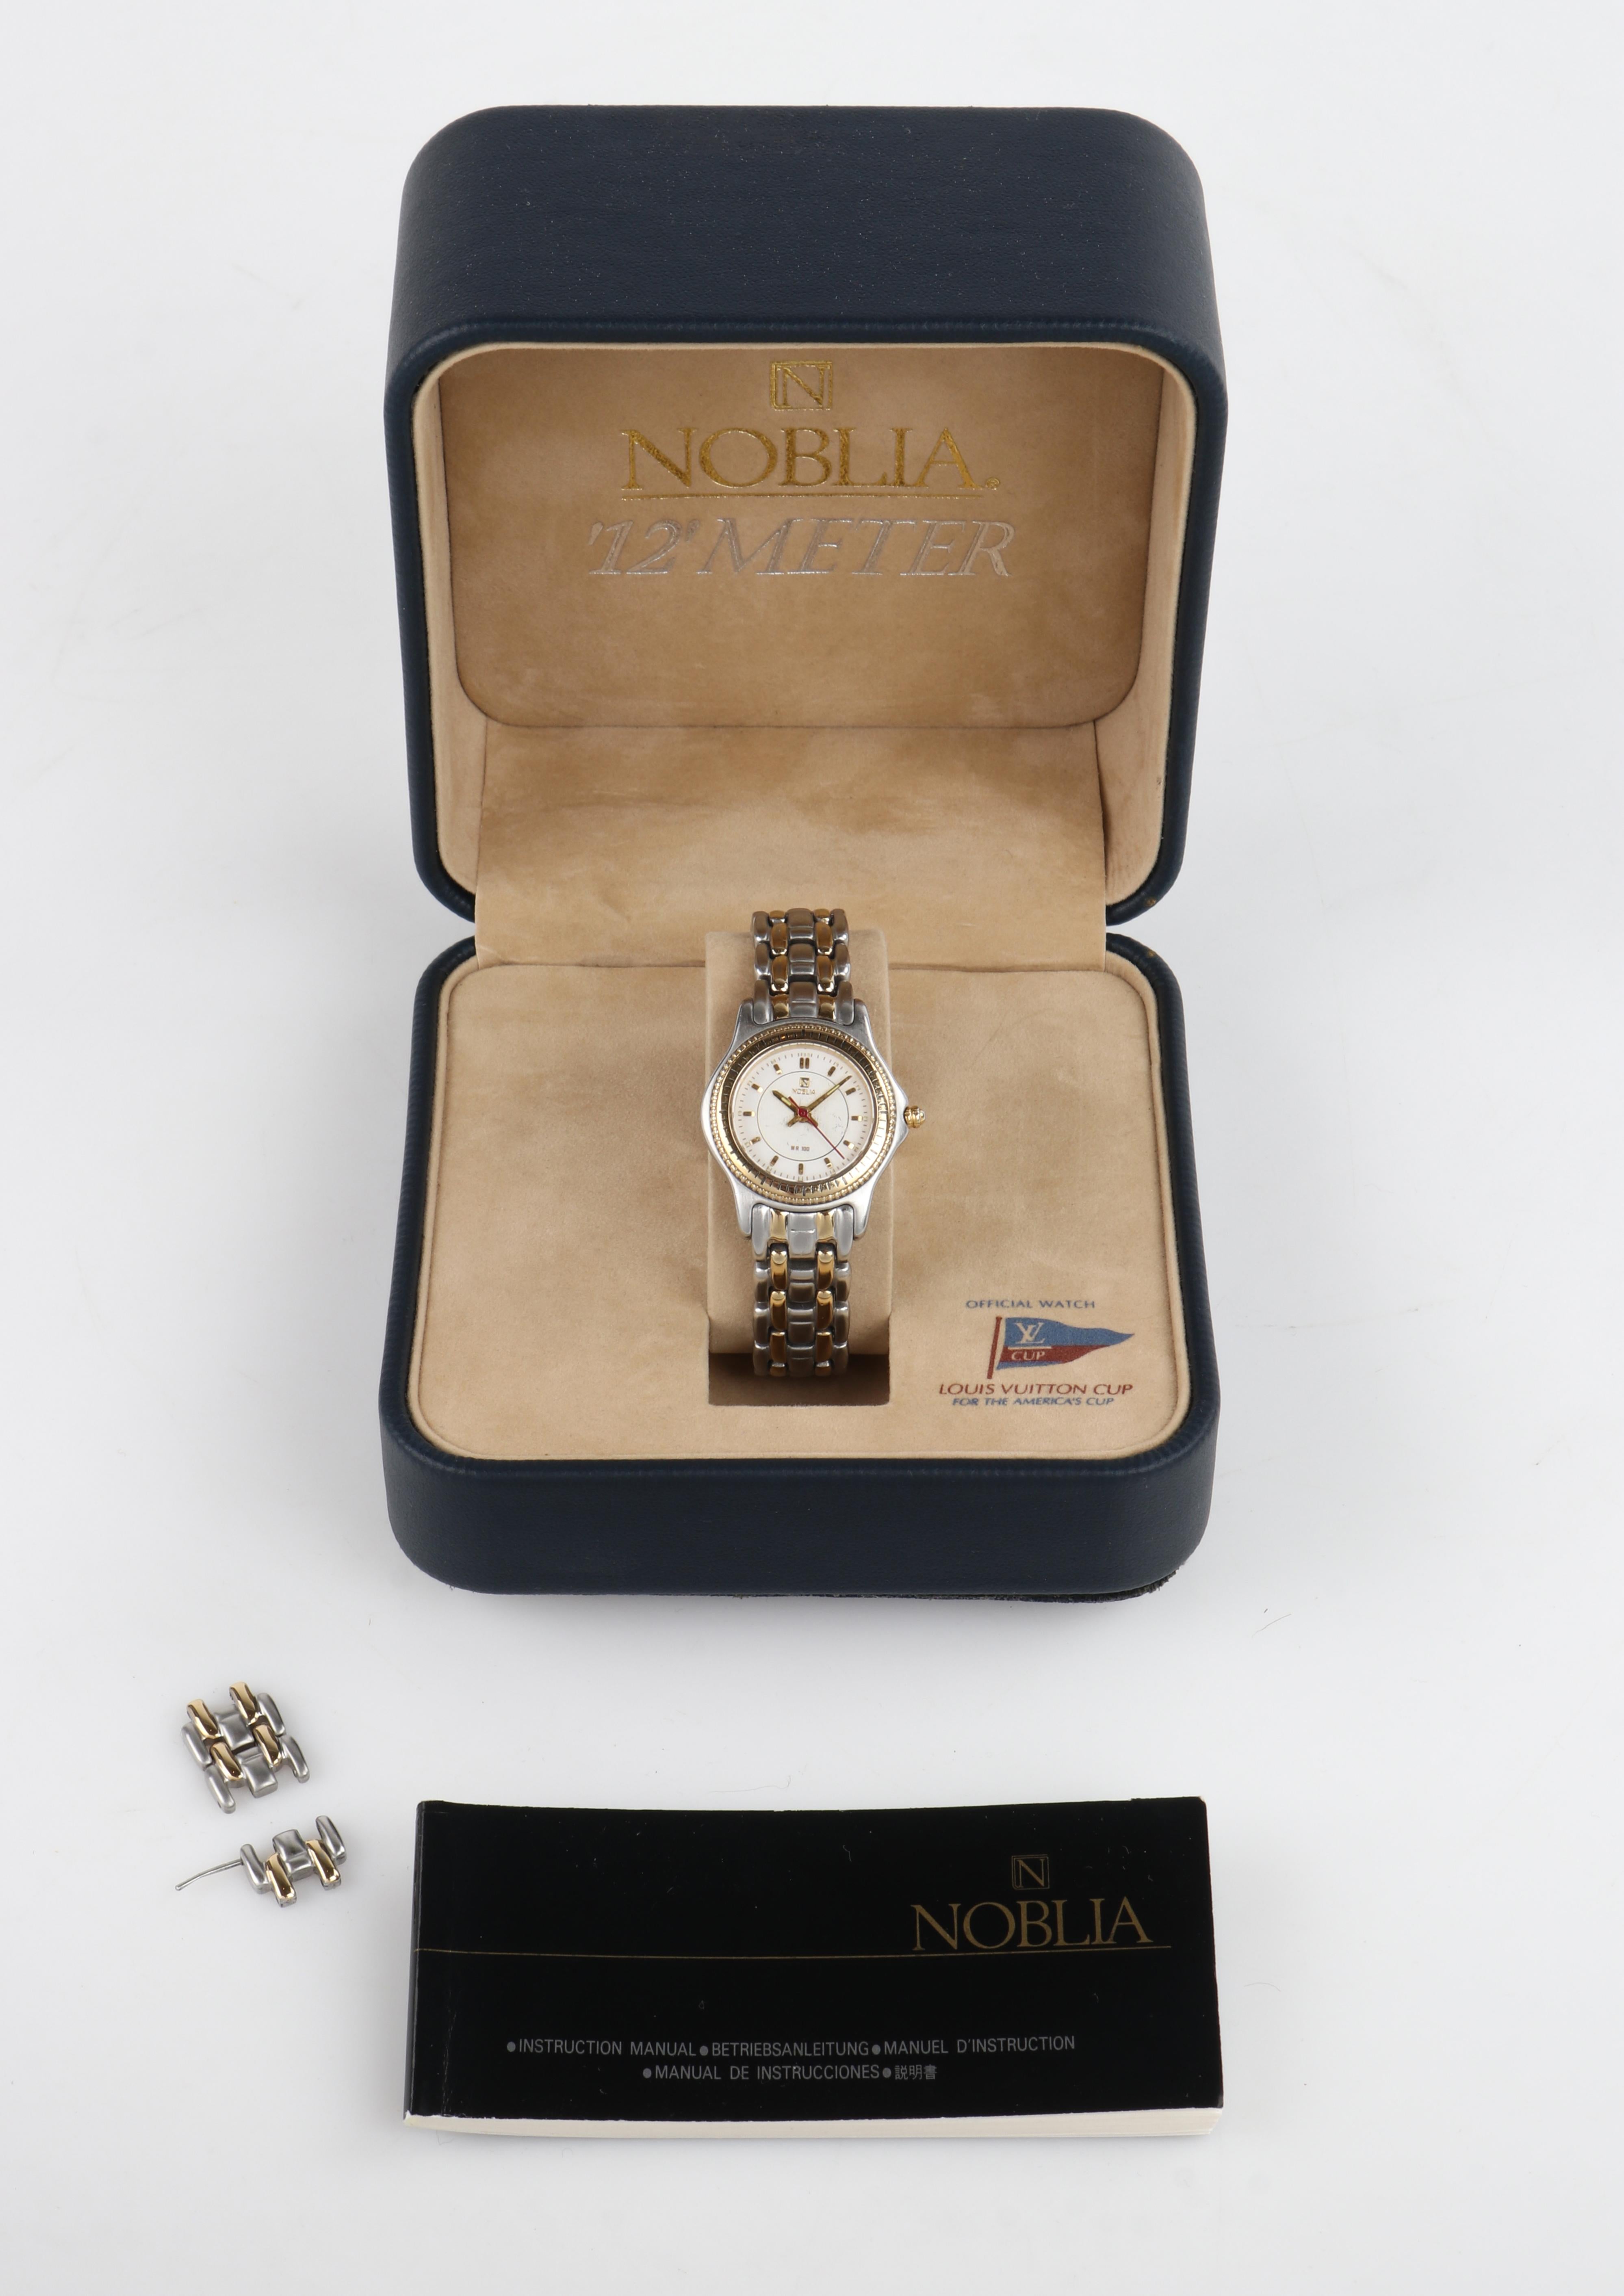 NOBLIA '12' METER Louis Vuitton Cup c.1995 Two-Tone Stainless Steel Wrist Watch

Brand / Manufacturer: Noblia
Collection: '12' Meter circa 1995
Style: Wrist watch
Color(s): Silver, Gold (metal) / White (dial) / Red (hand)
Lined: No
Marked Material: